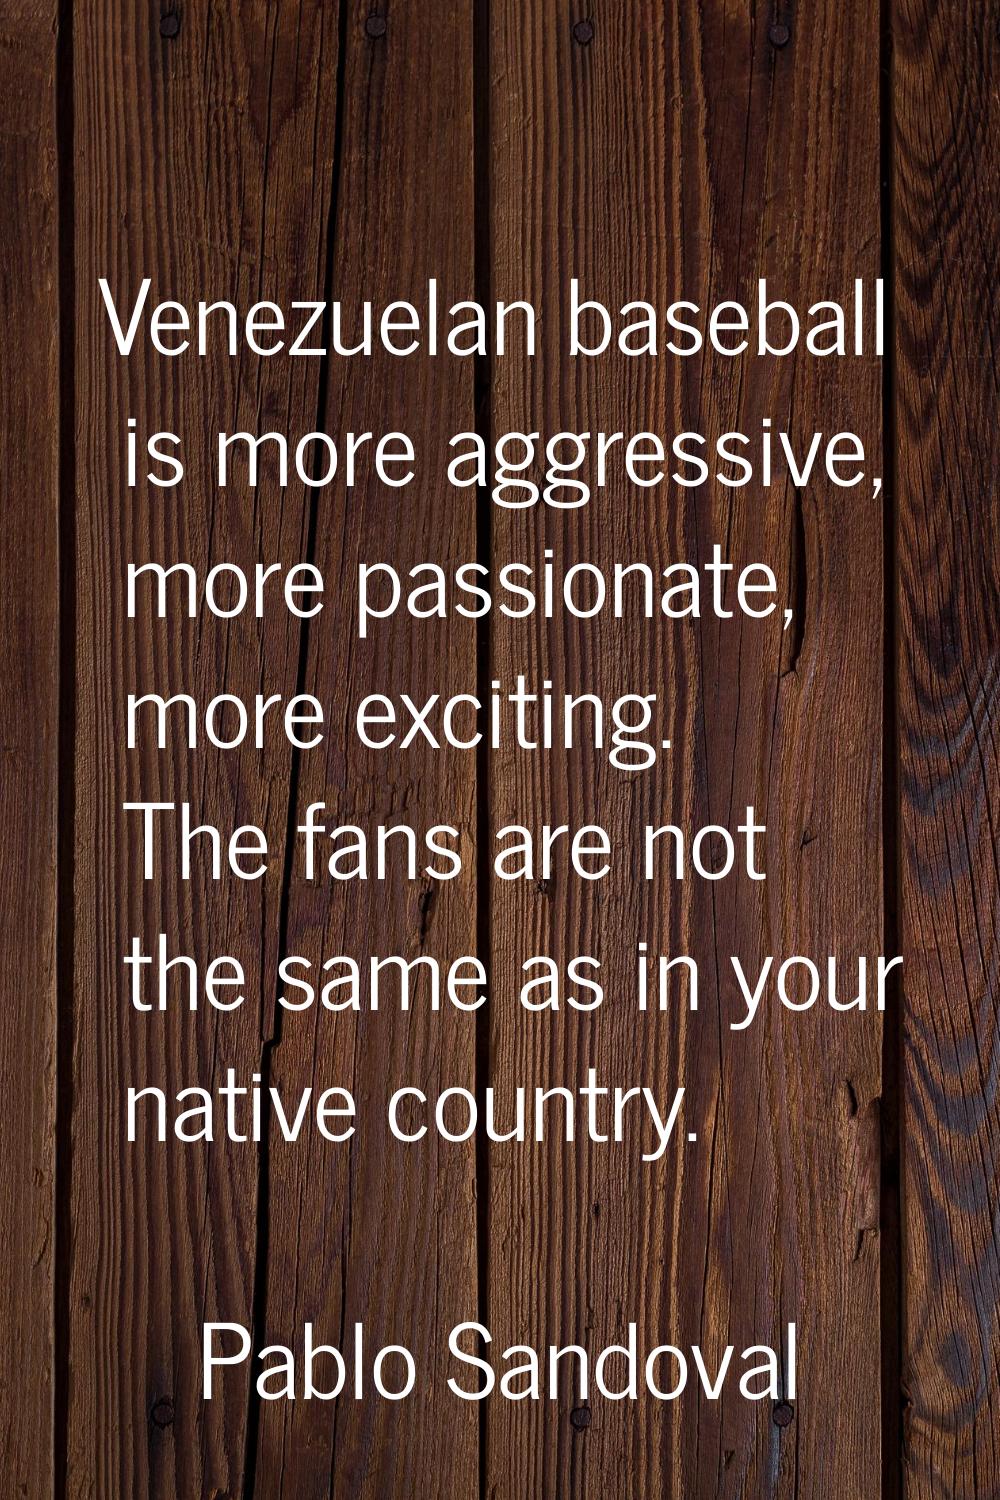 Venezuelan baseball is more aggressive, more passionate, more exciting. The fans are not the same a